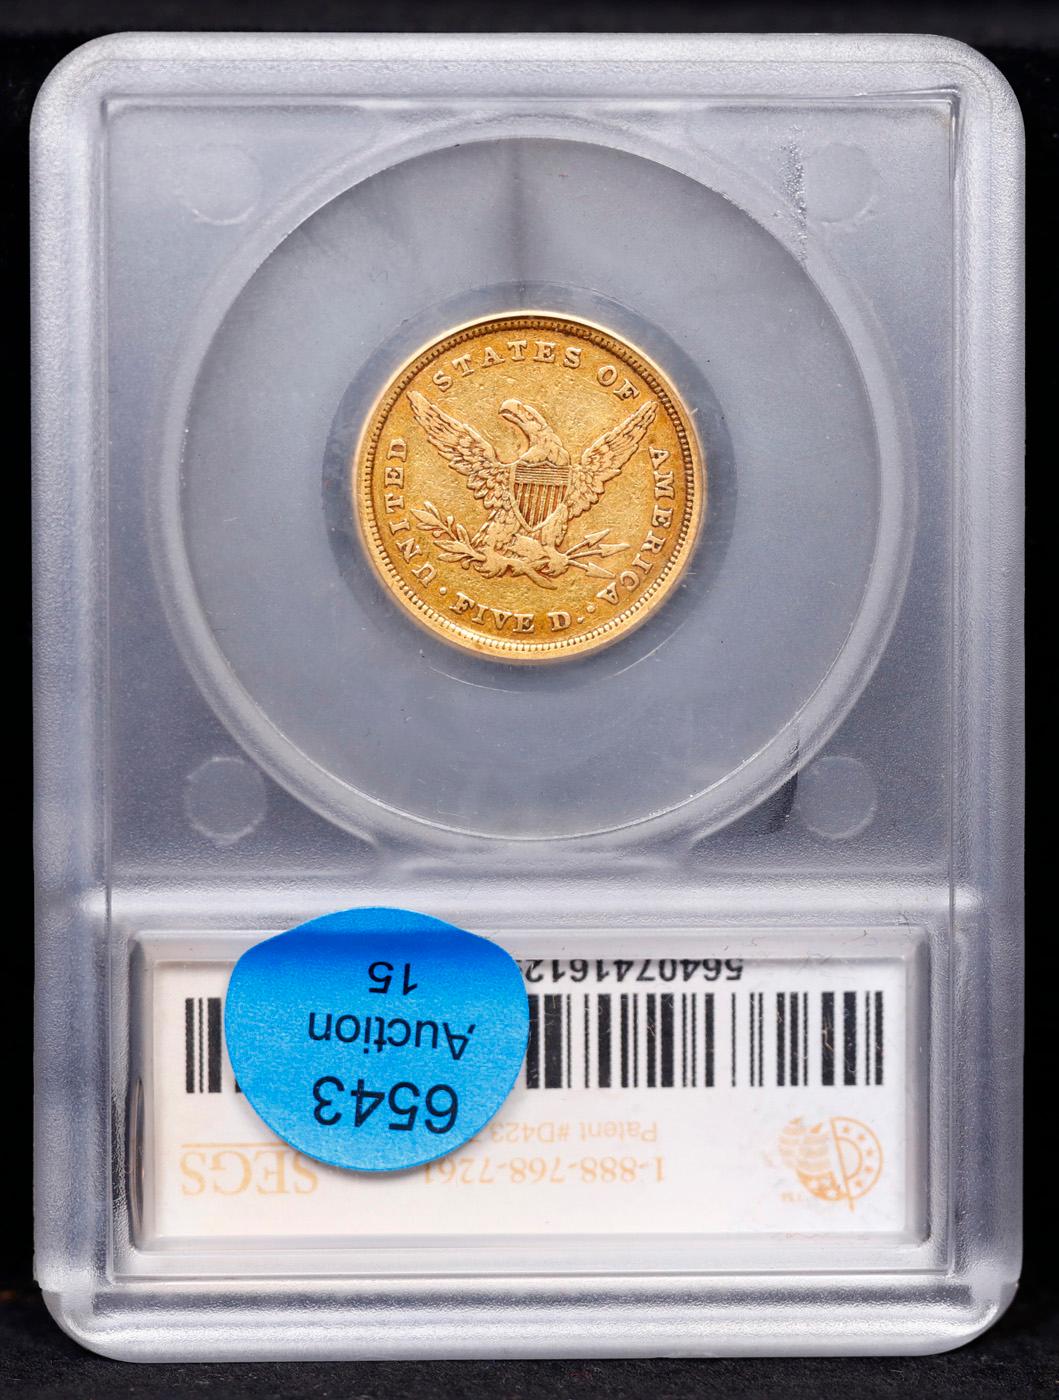 ***Auction Highlight*** 1839-c Gold Liberty Half Eagle Charlotte 5 Graded vf35 By SEGS (fc)